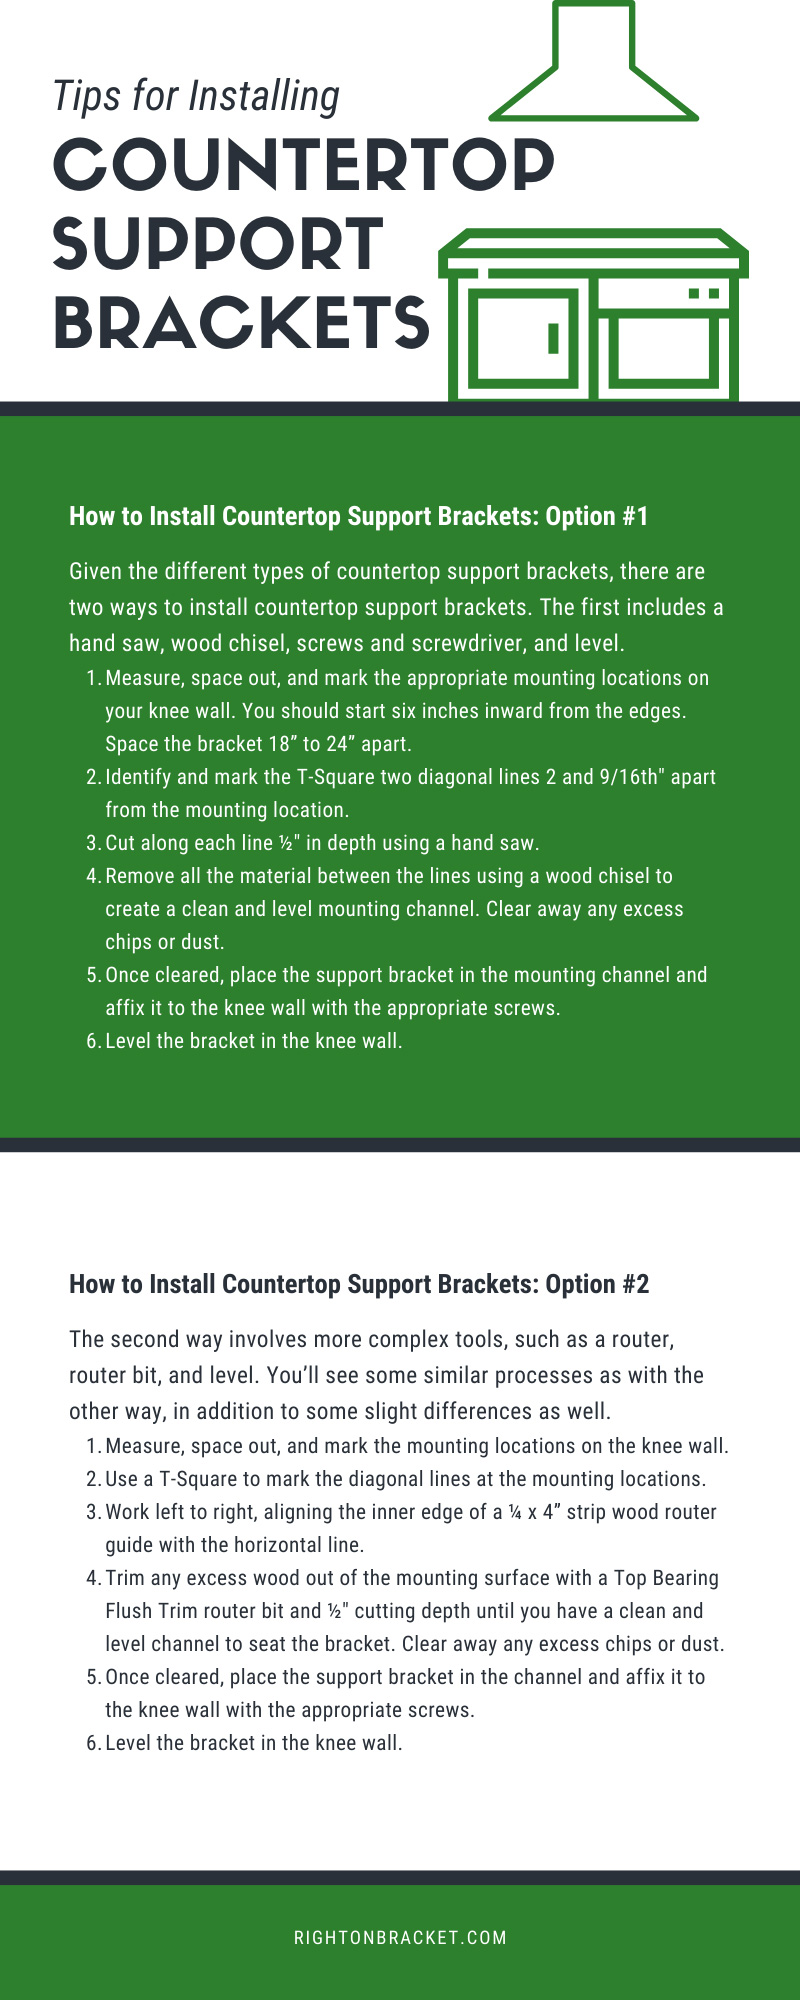 Tips for Installing Countertop Support Brackets - Infographic